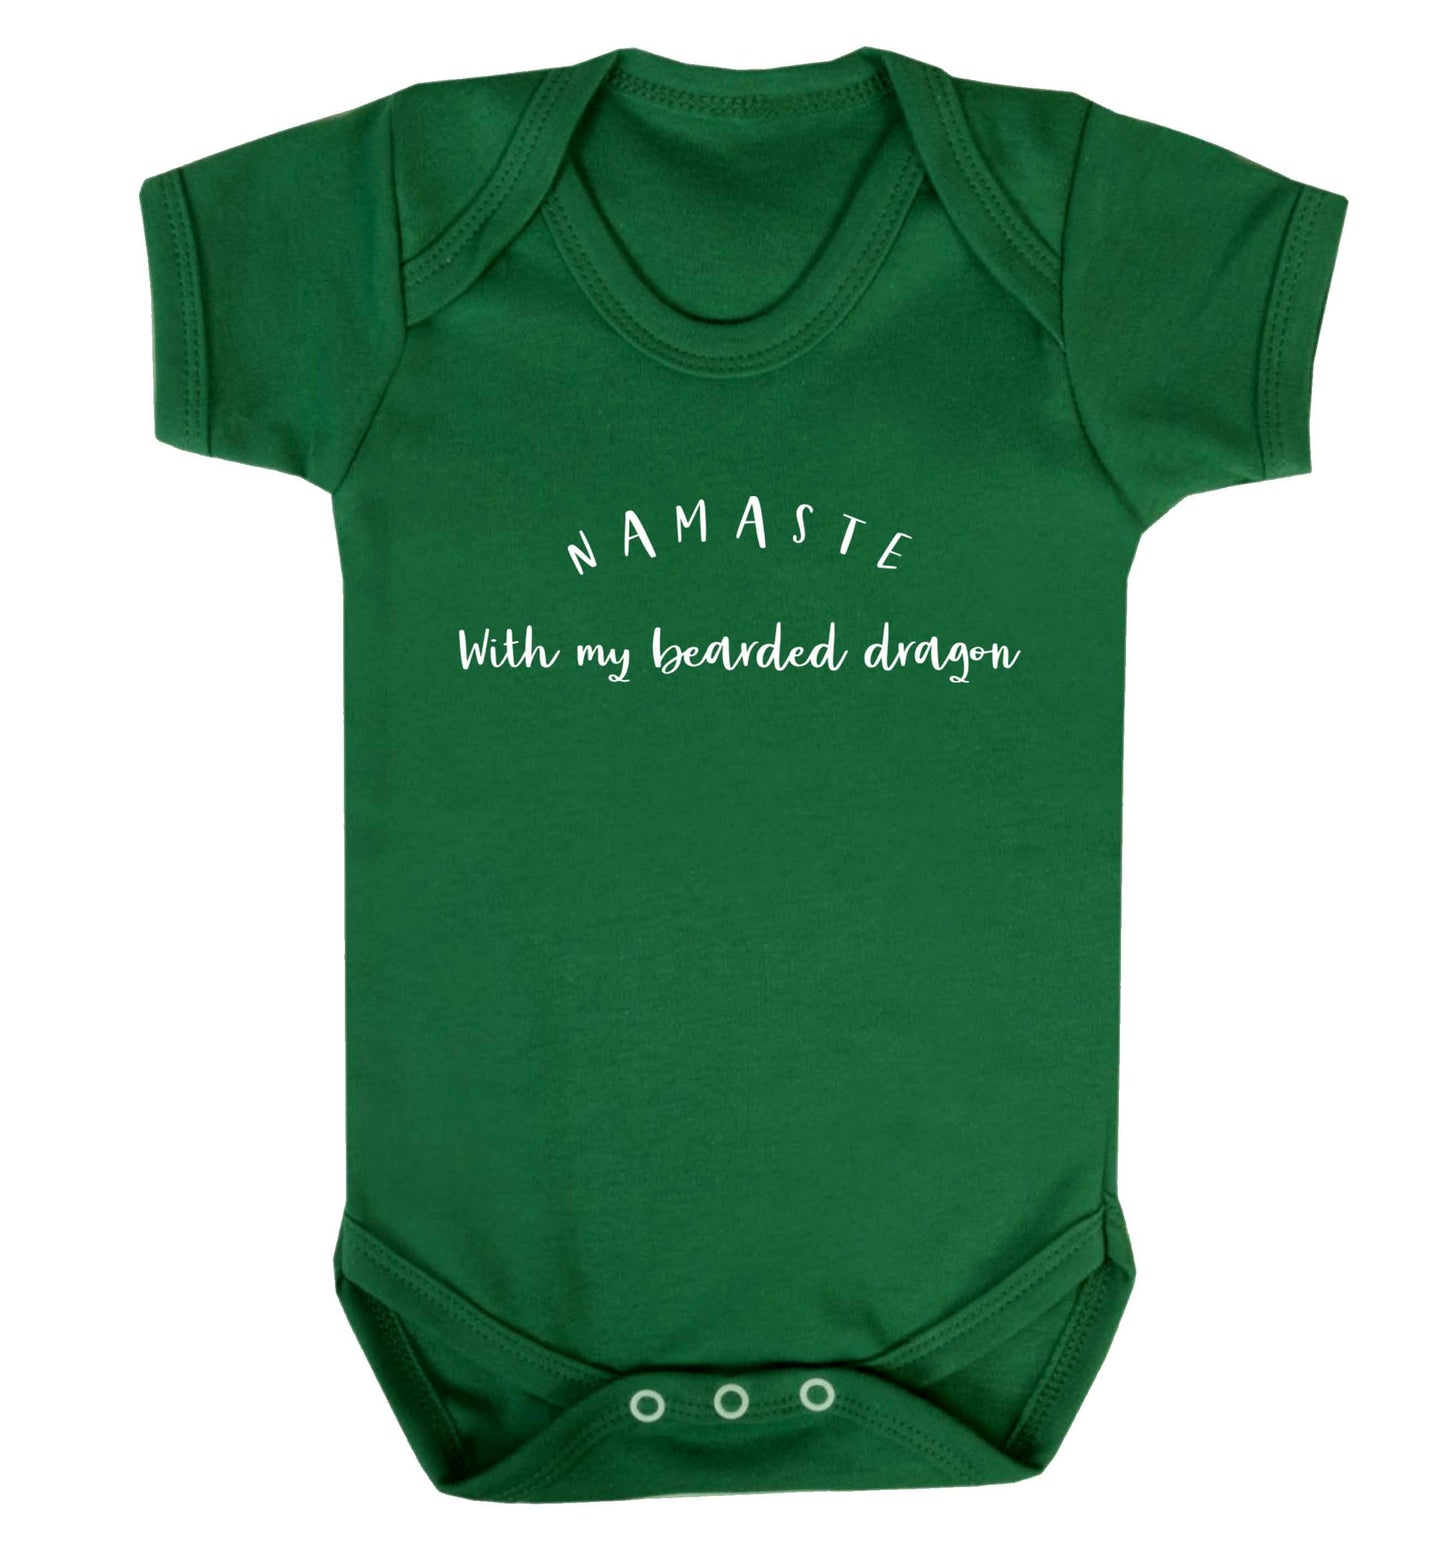 Namaste with my bearded dragon Baby Vest green 18-24 months